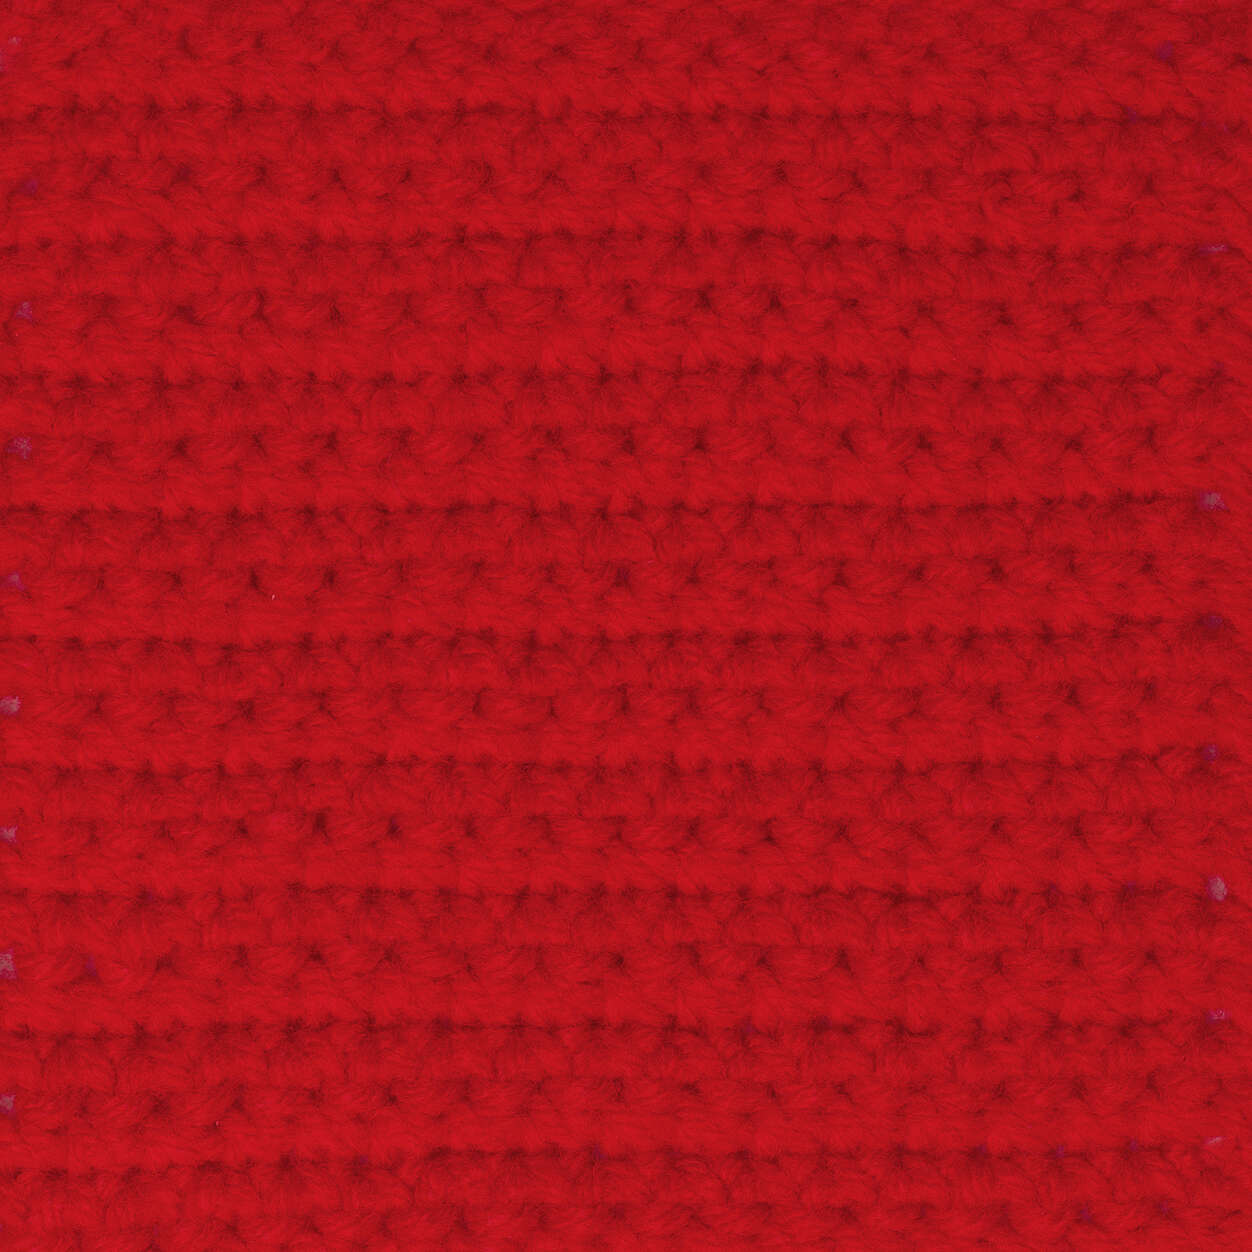 Red Heart Super Saver Yarn Hot Red